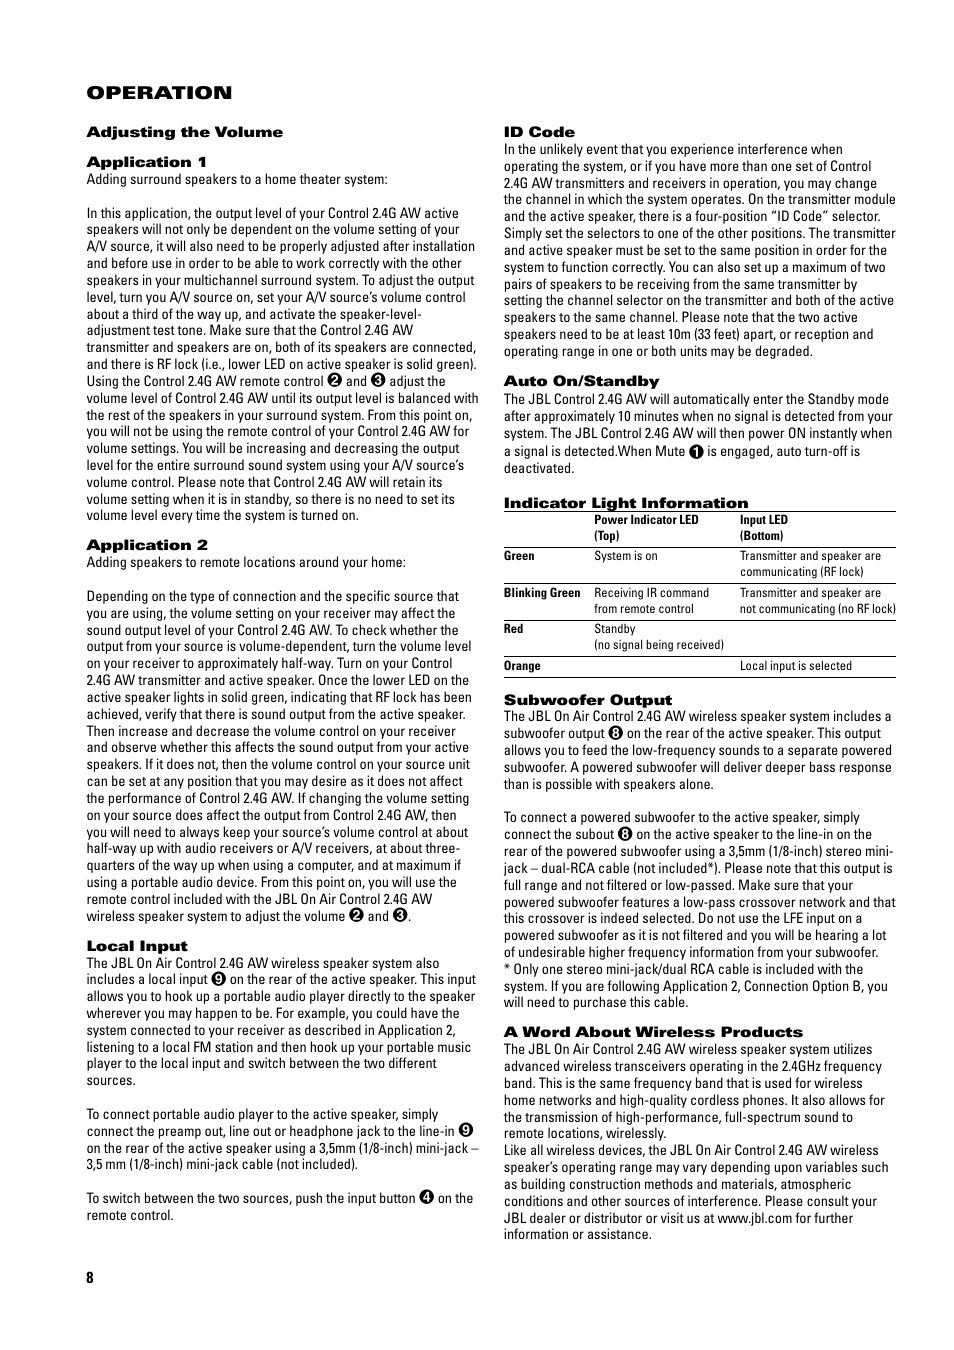 Operation | JBL 2.4G AW User Manual | Page 8 / 12